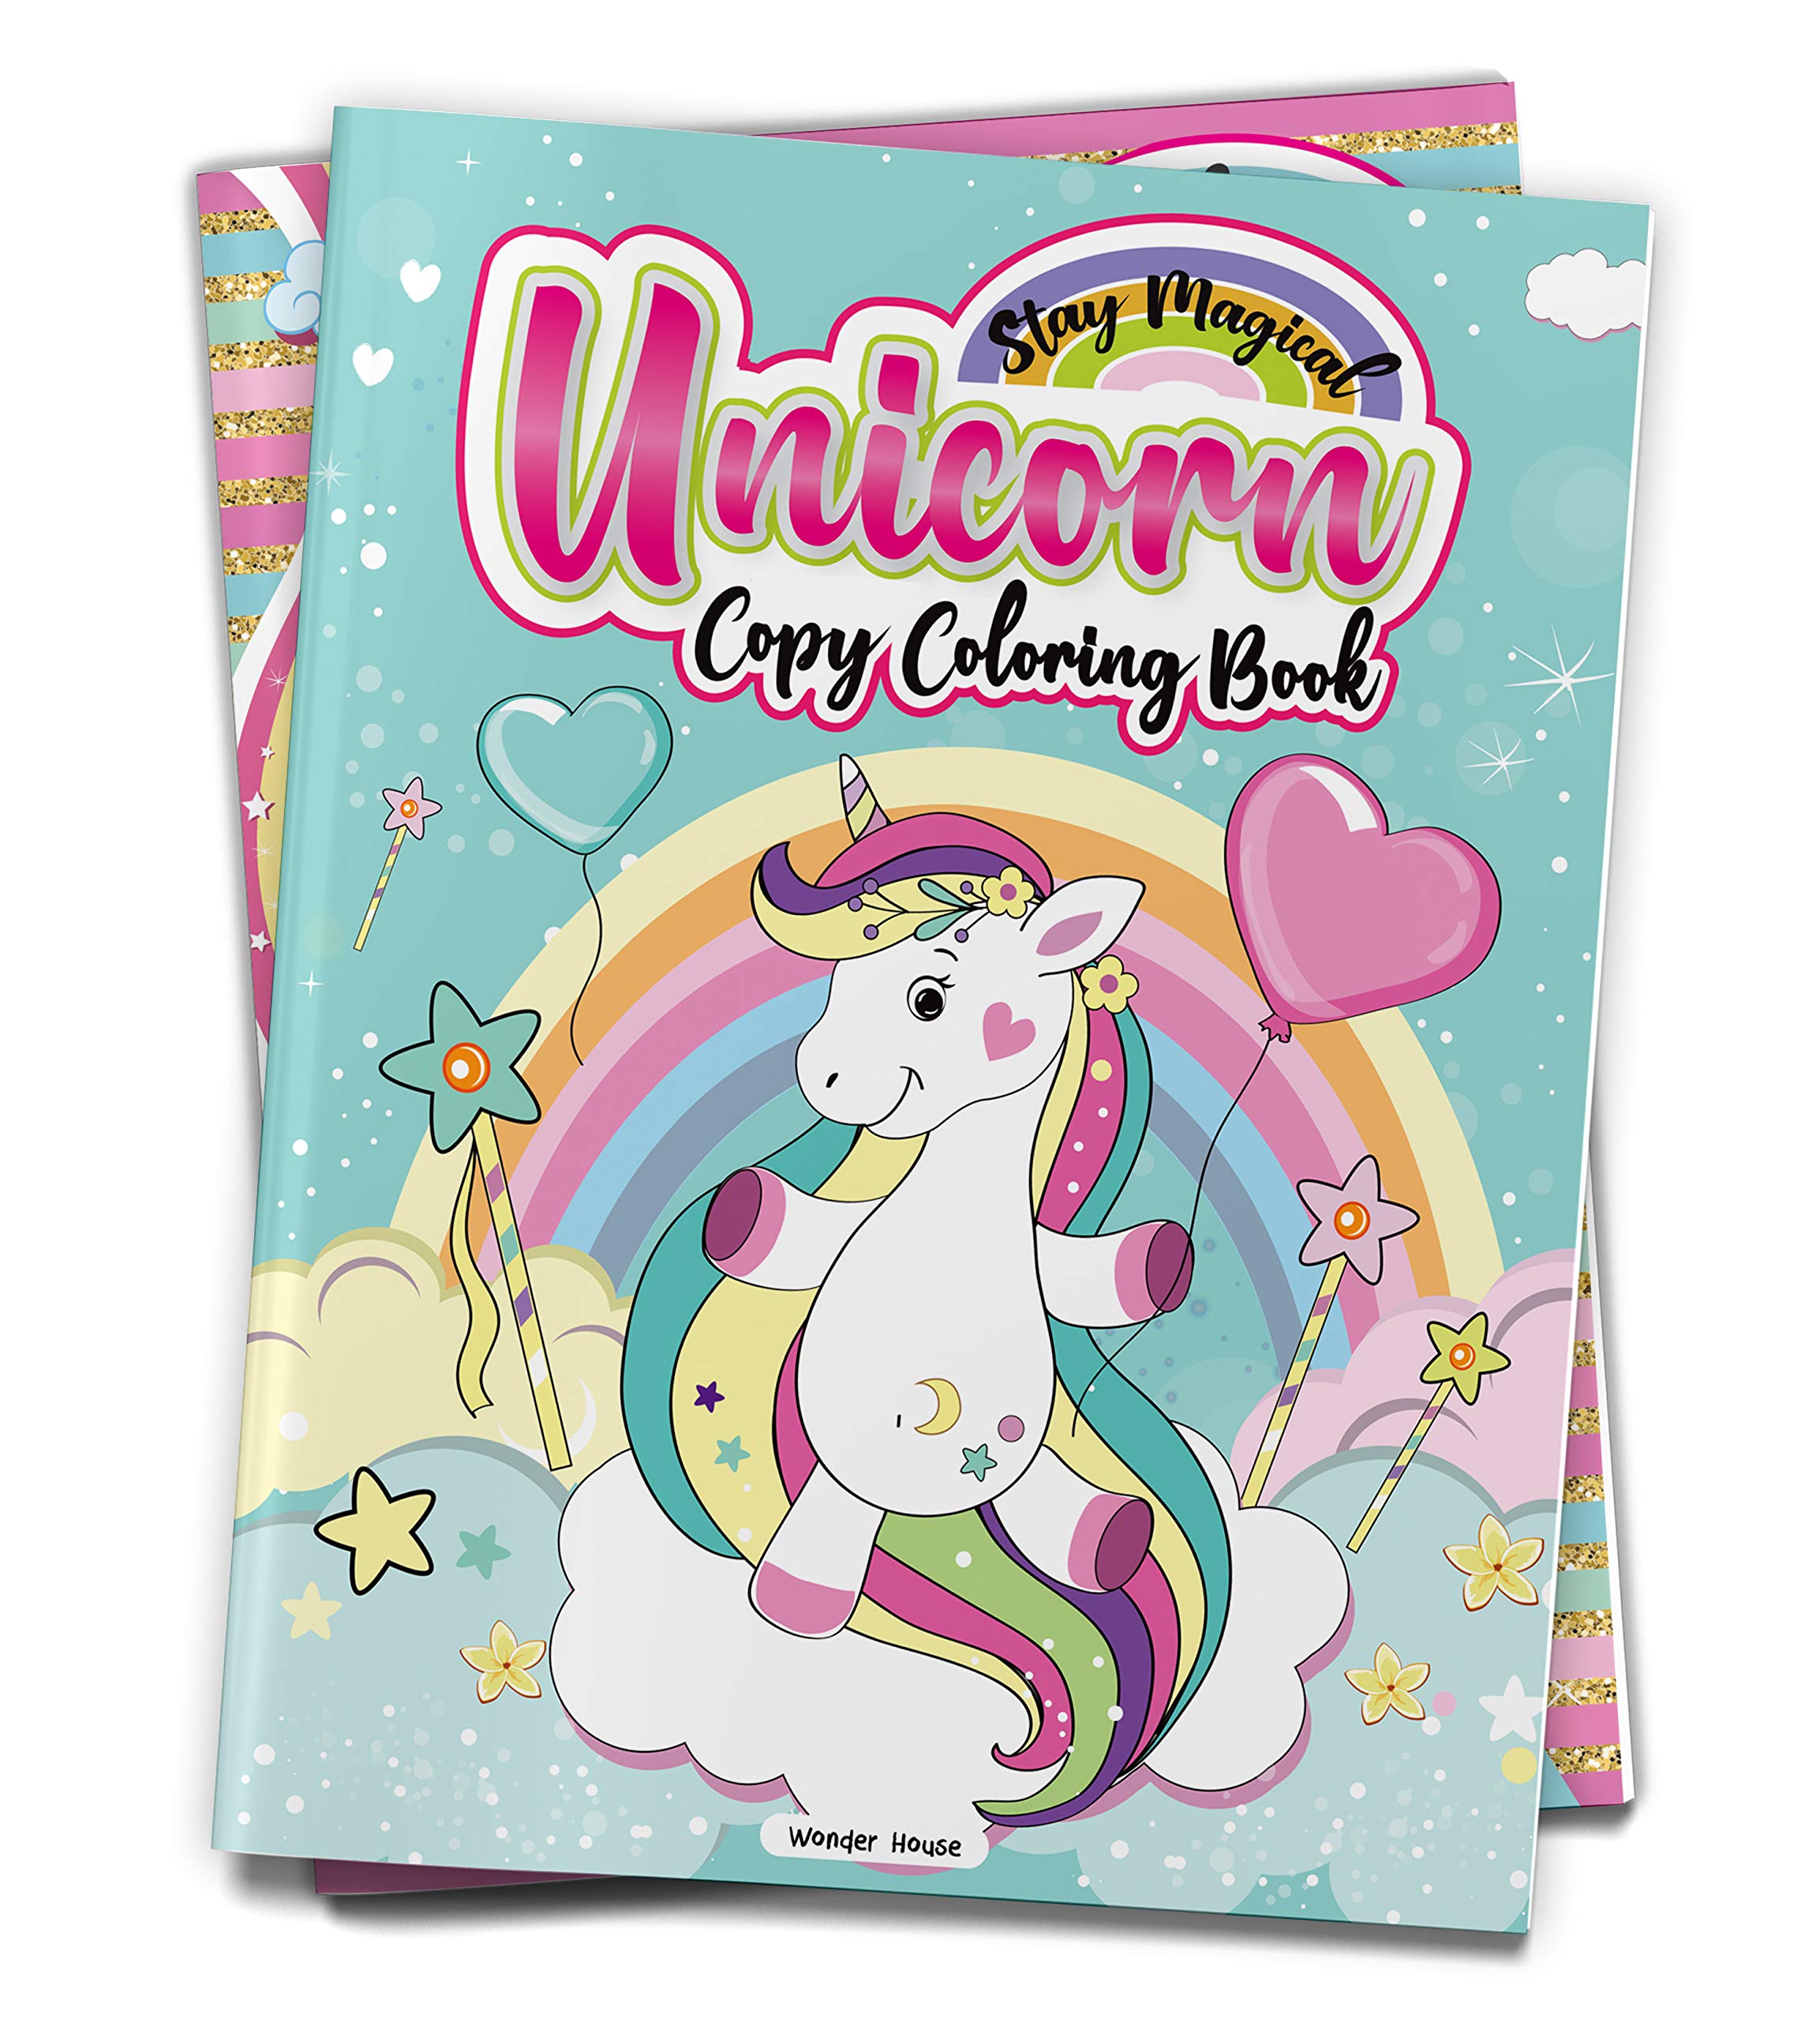 Stay Magical Unicorn Copy Coloring Book